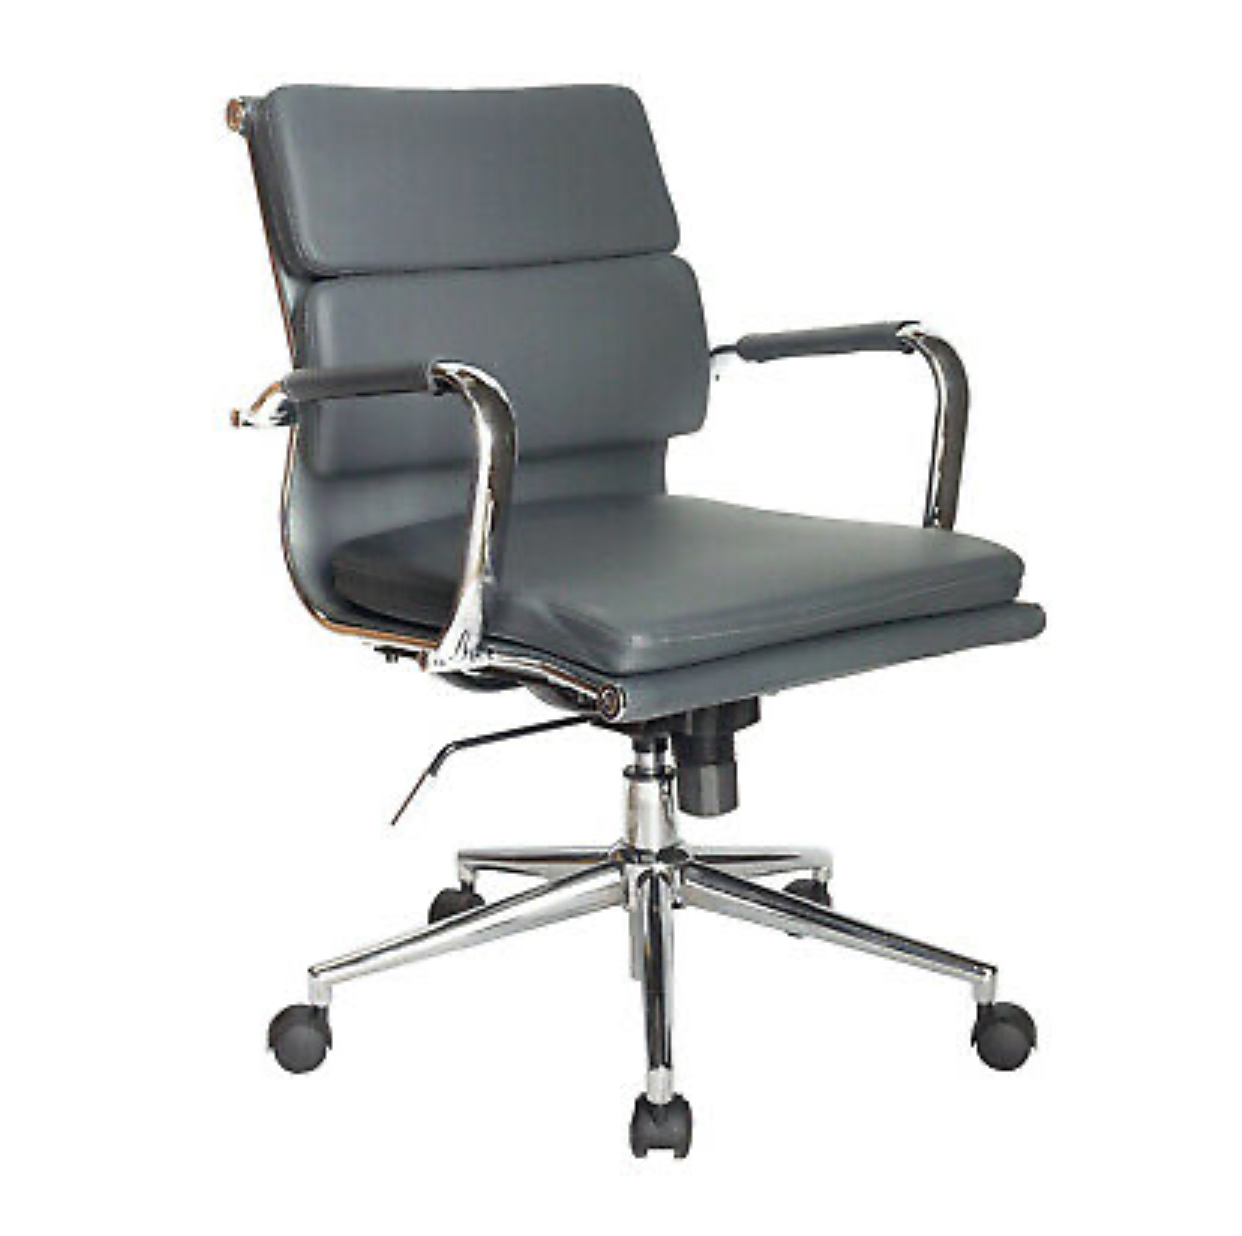 Budget Eames Style Soft Pad Designer, Grey Leather Executive Office Chair